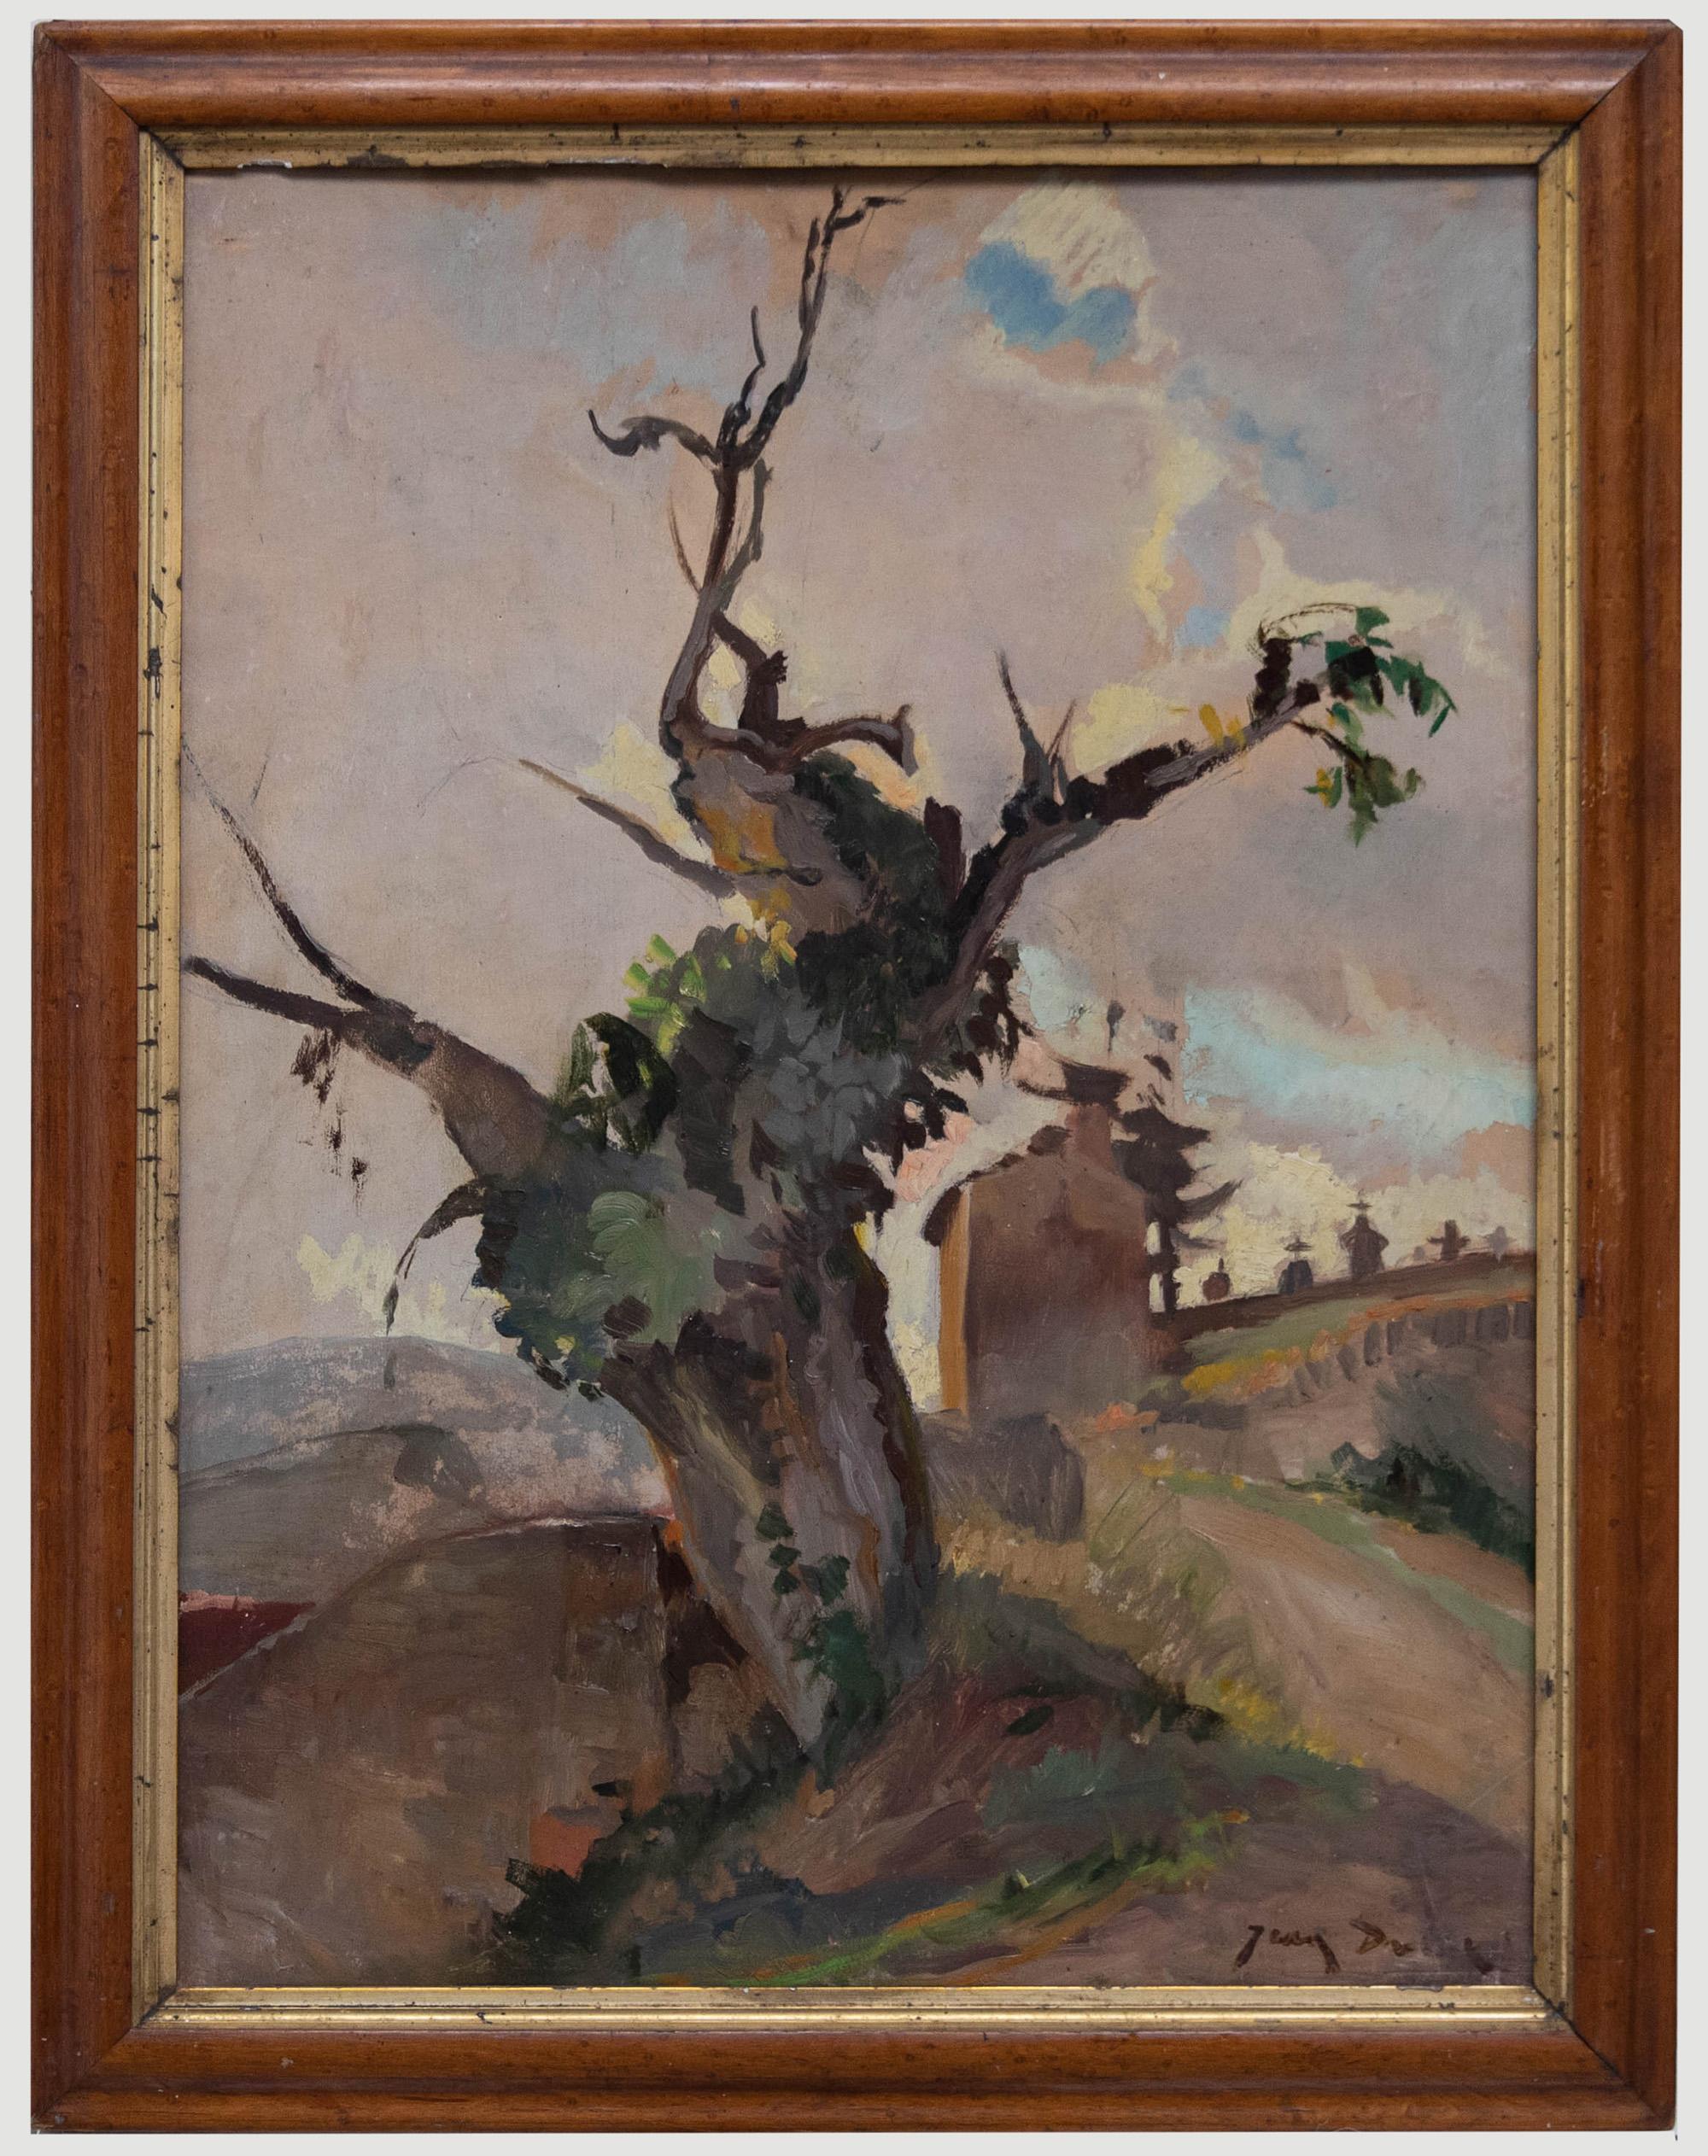 Unknown Landscape Painting - Jean Dulac (1902-1968) - Framed Mid 20th Century Oil, The Old Walnut Tree